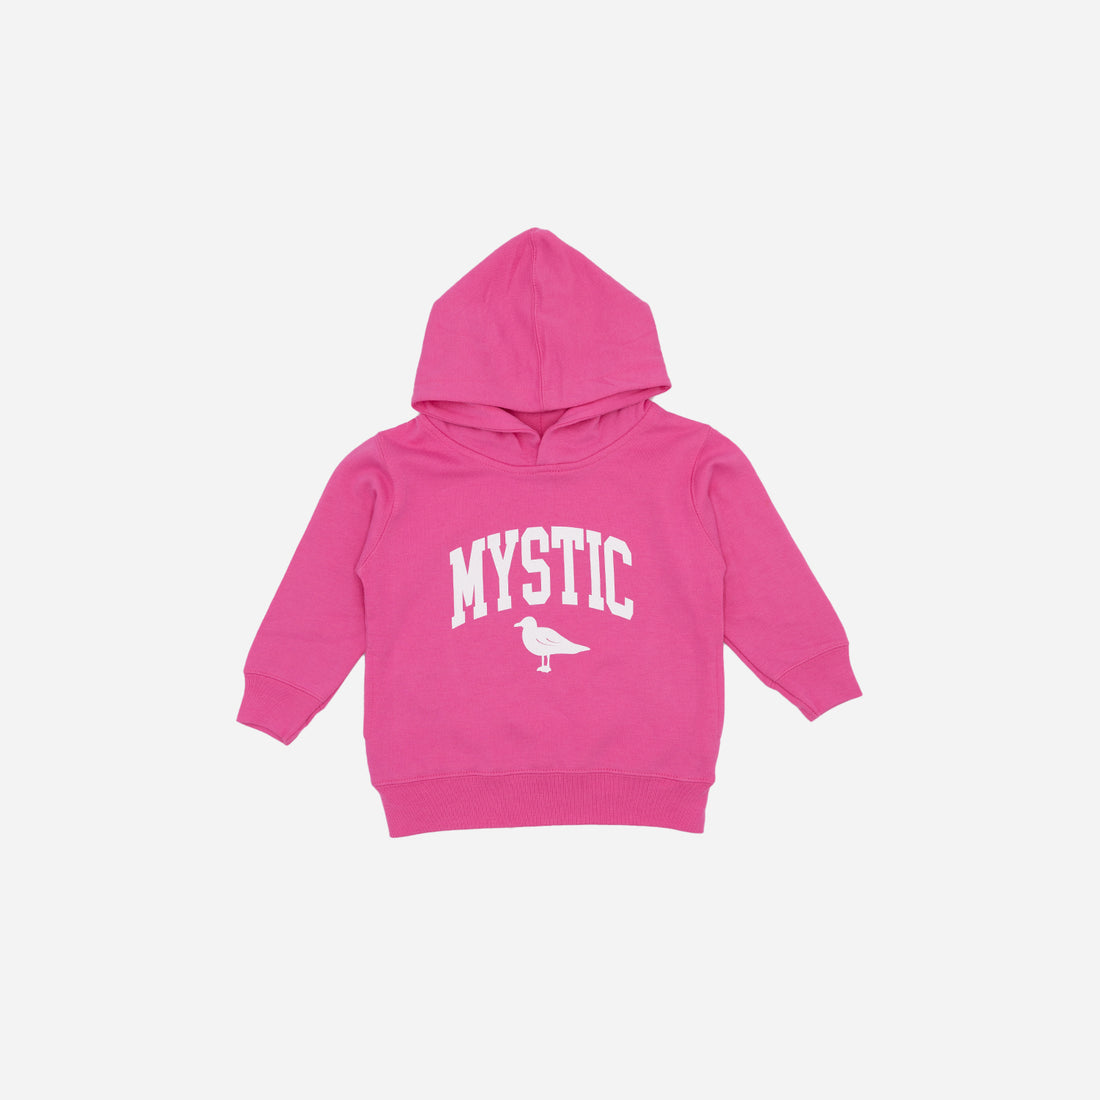 Youth & Kids Apparel from Just Mystic – Just Mystic Brand